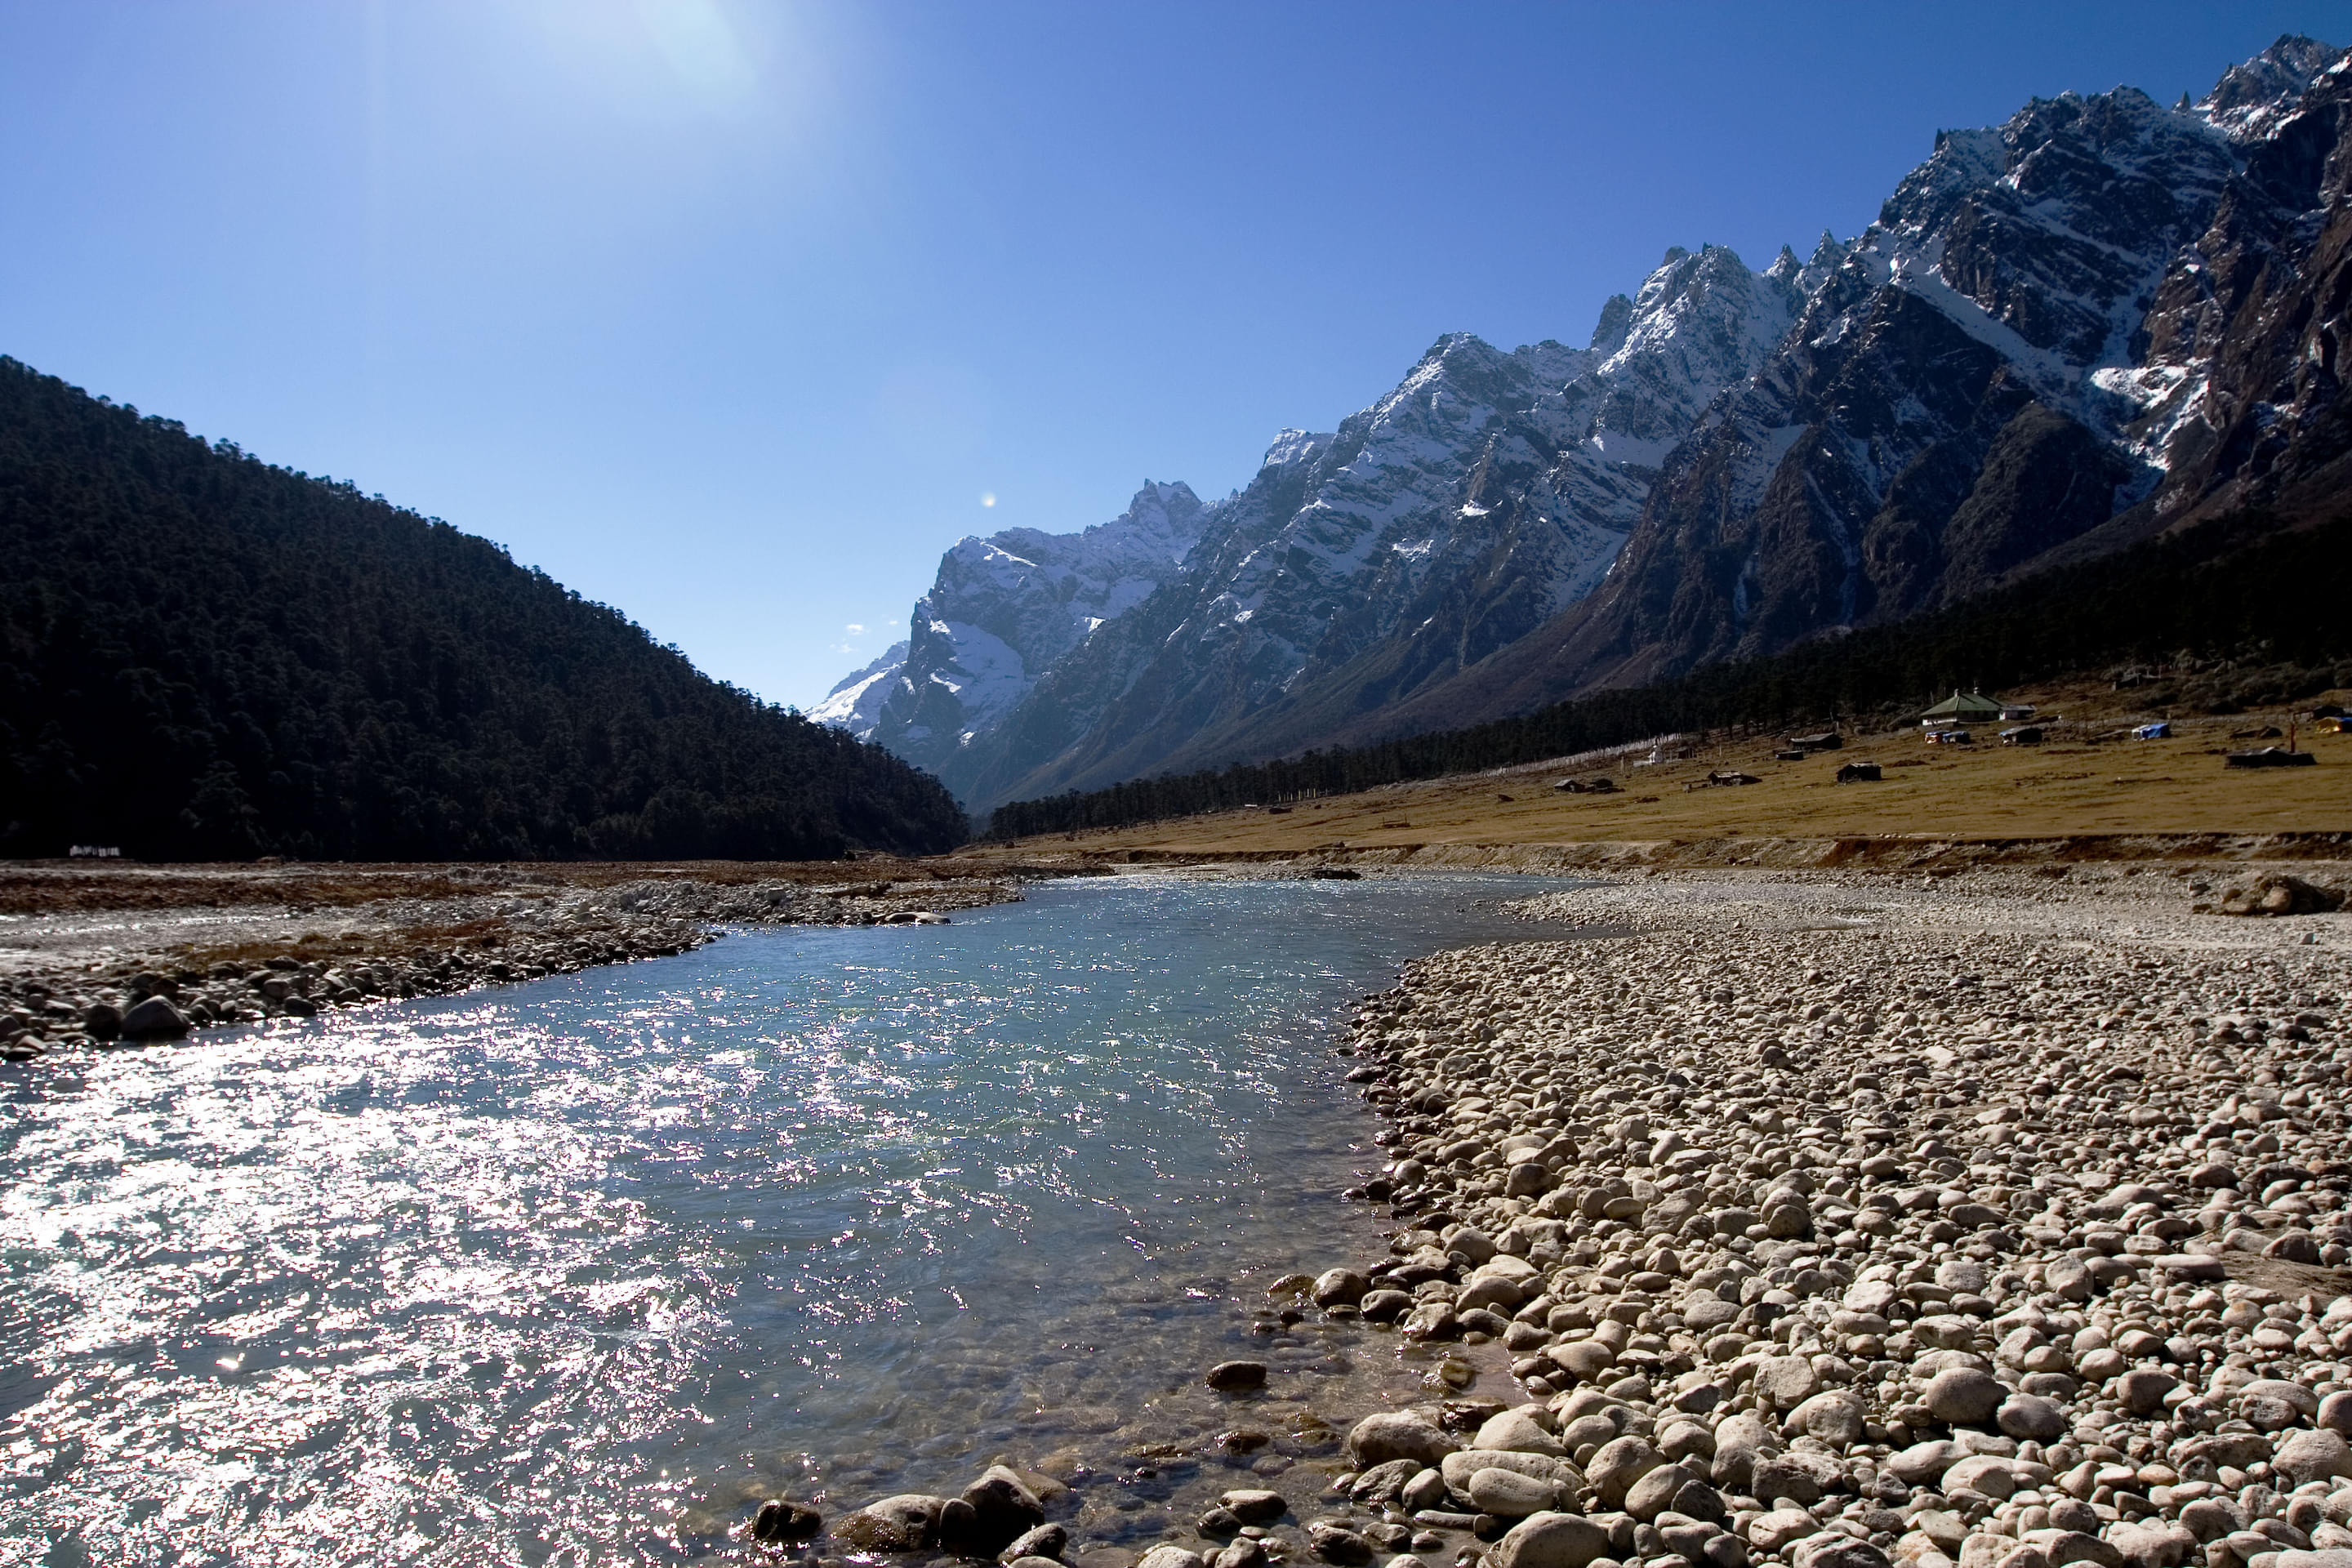 Lachung Chu River Overview